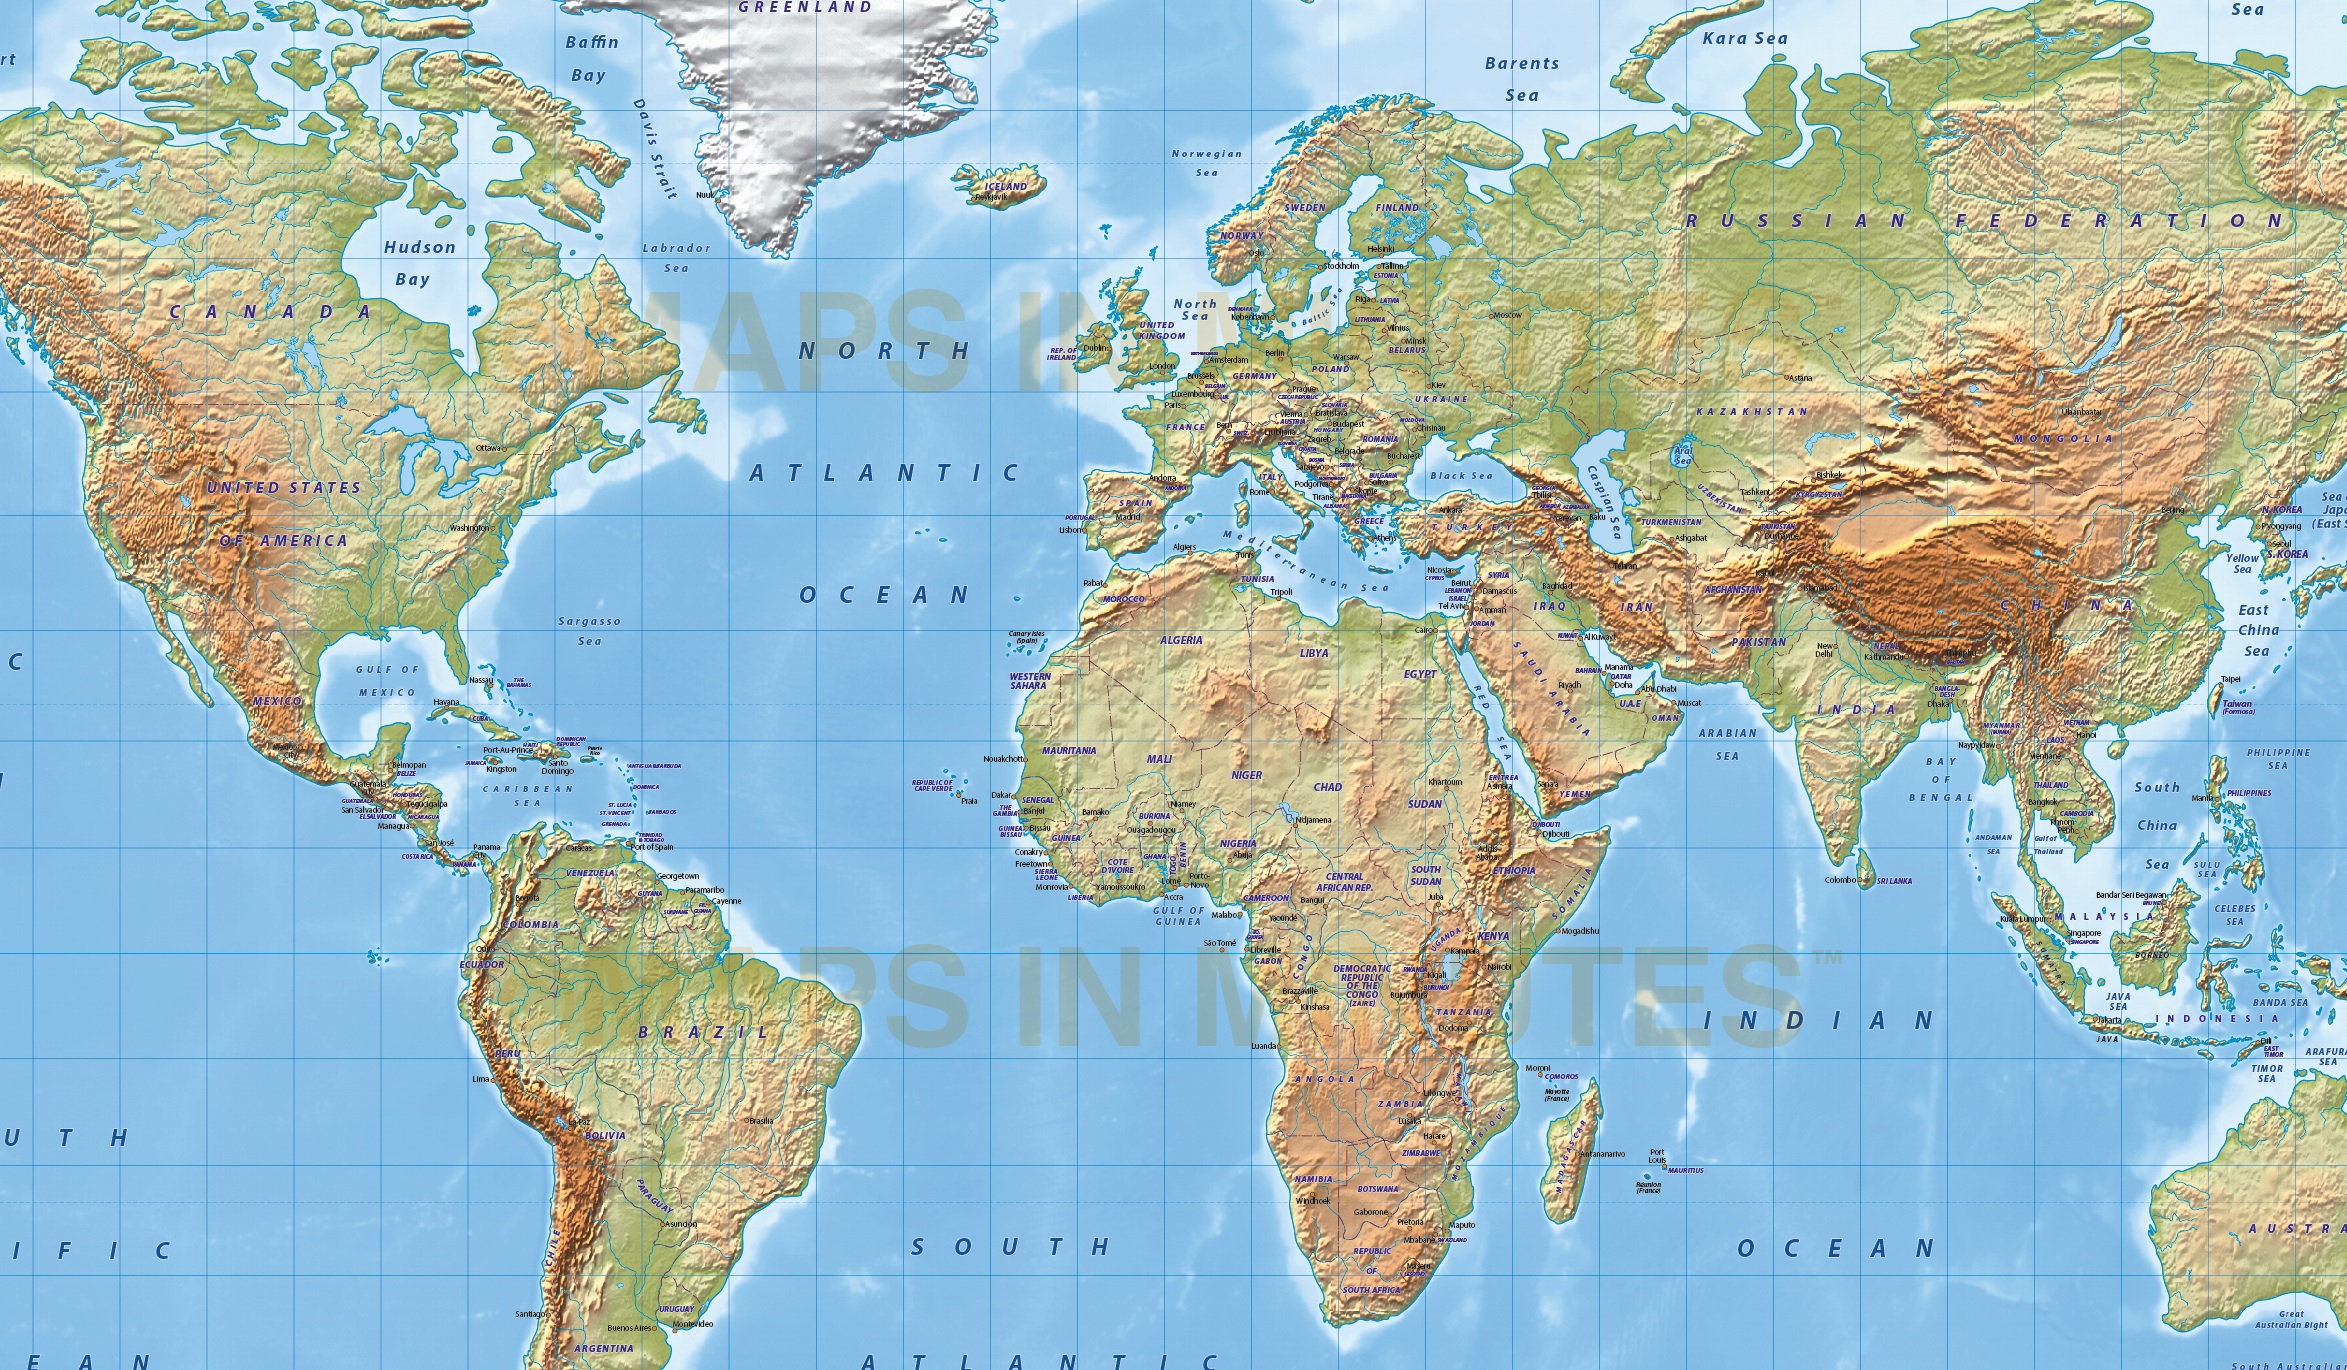 map of the World World Mapsland Maps World Relief Map, Printable World Reli...